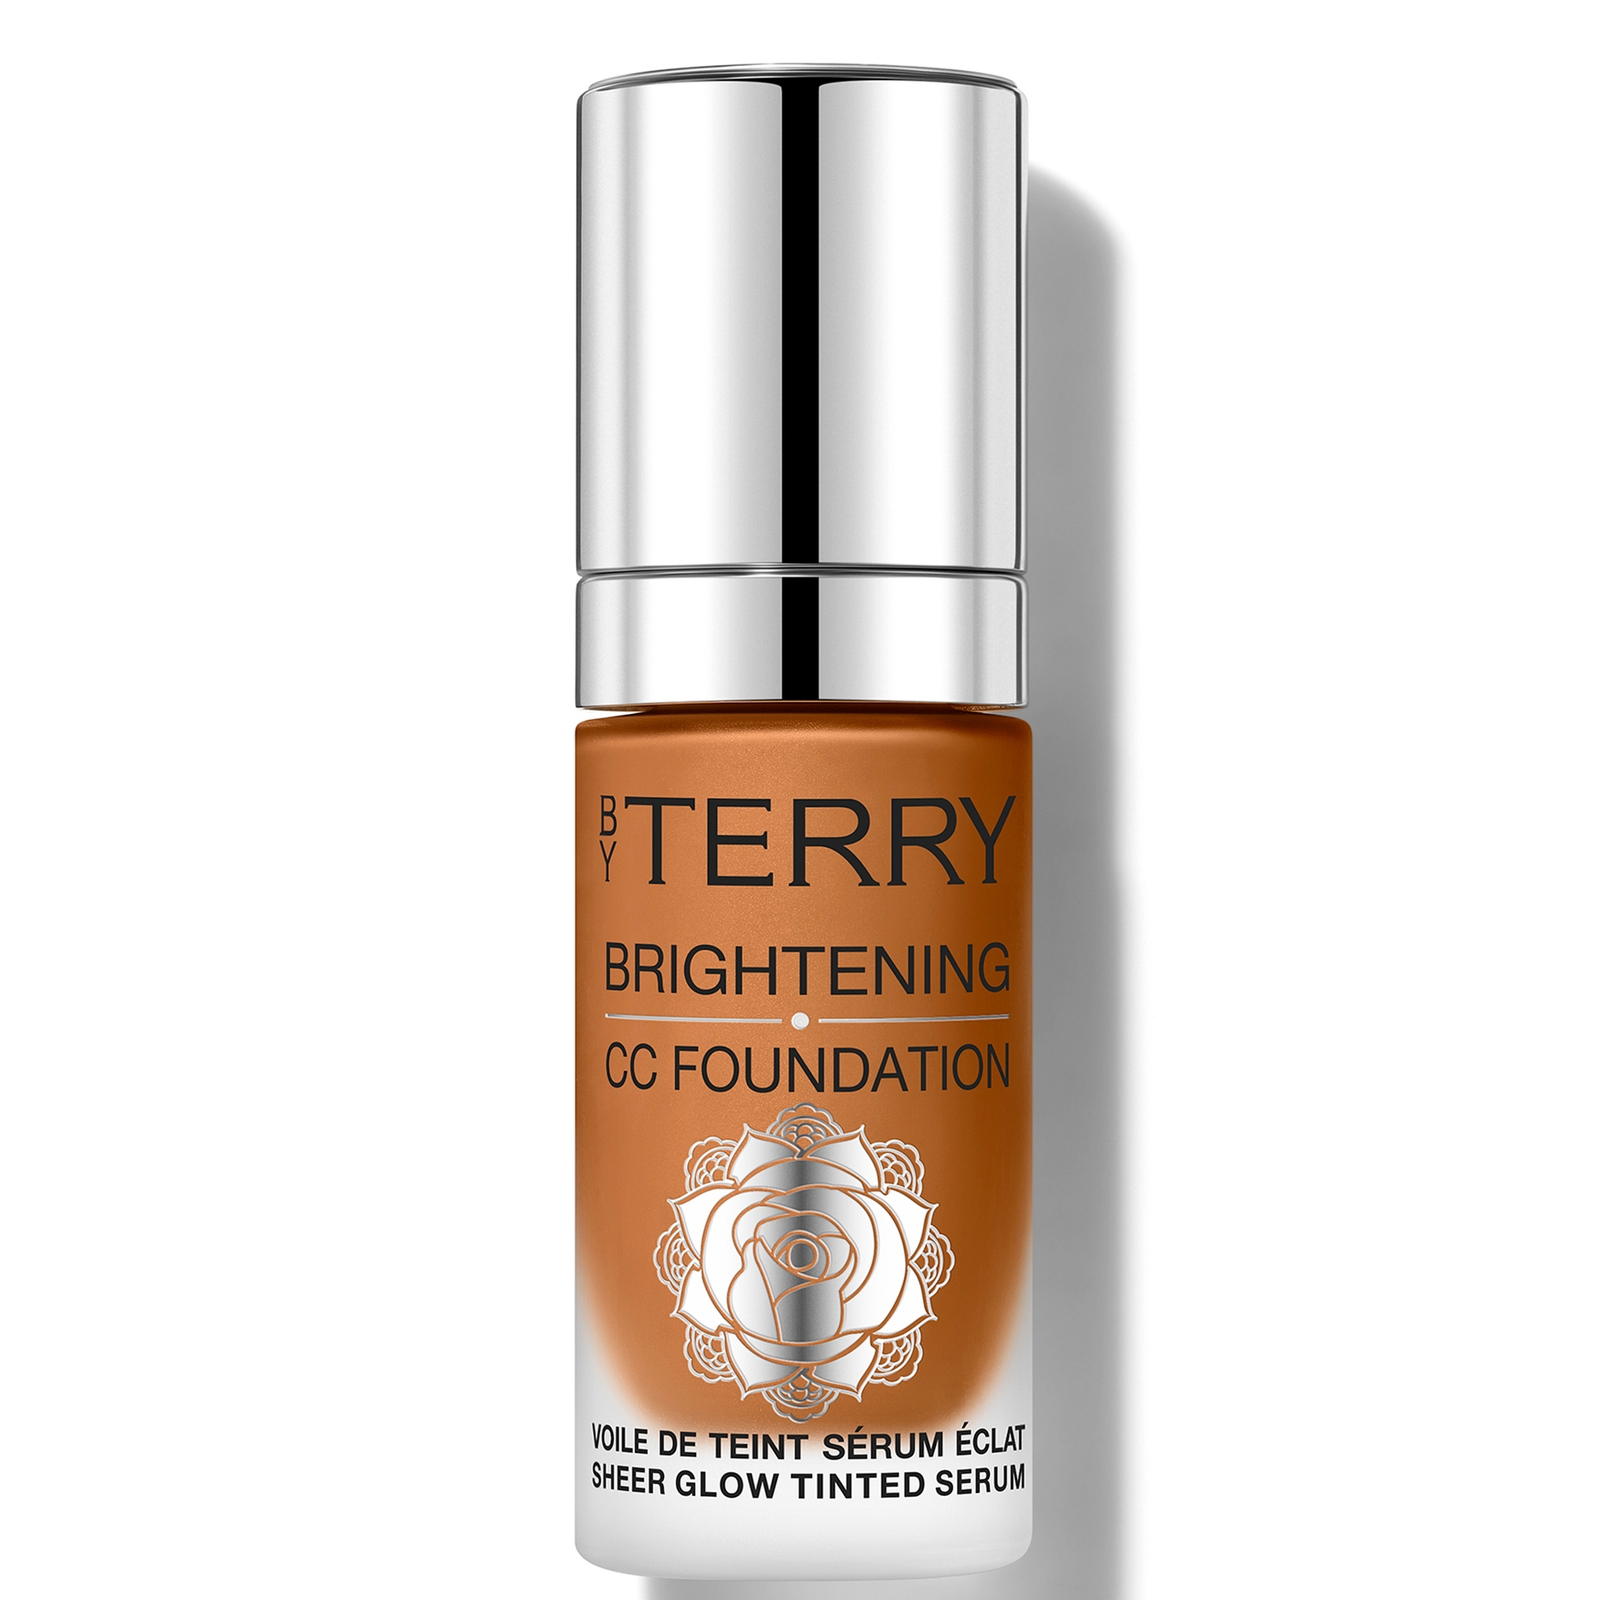 Image of By Terry Brightening CC Foundation 30ml (Various Shades) - 7W - MEDIUM DEEP WARM